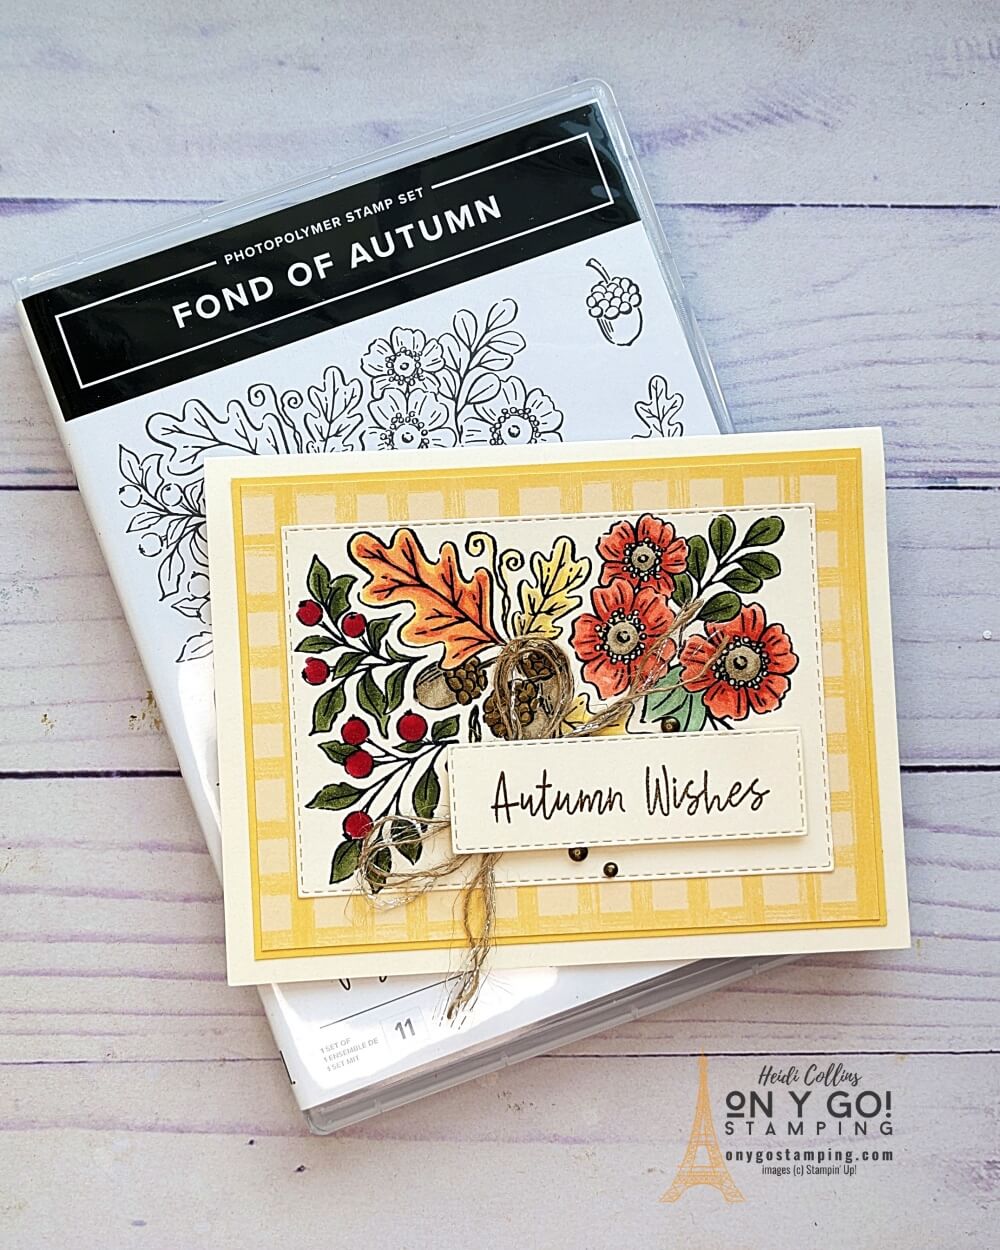 Use Stampin' Blends alcohol markers to color this soft fall floral card using the Fond of Autumn stamp set from Stampin' Up!® See the video tutorial too!